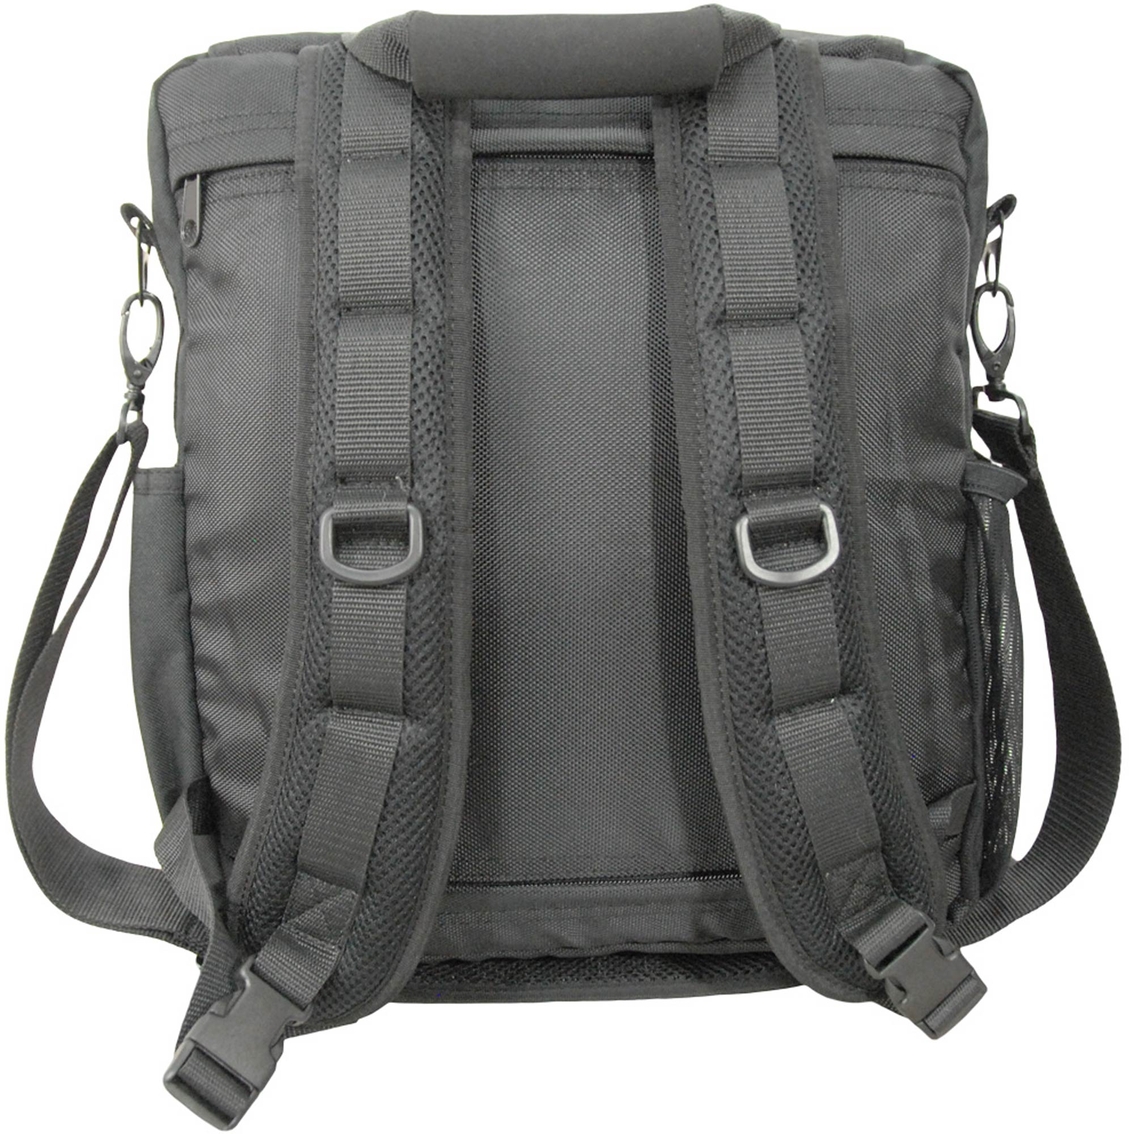 Flying Circle Business Backpack - Image 2 of 4